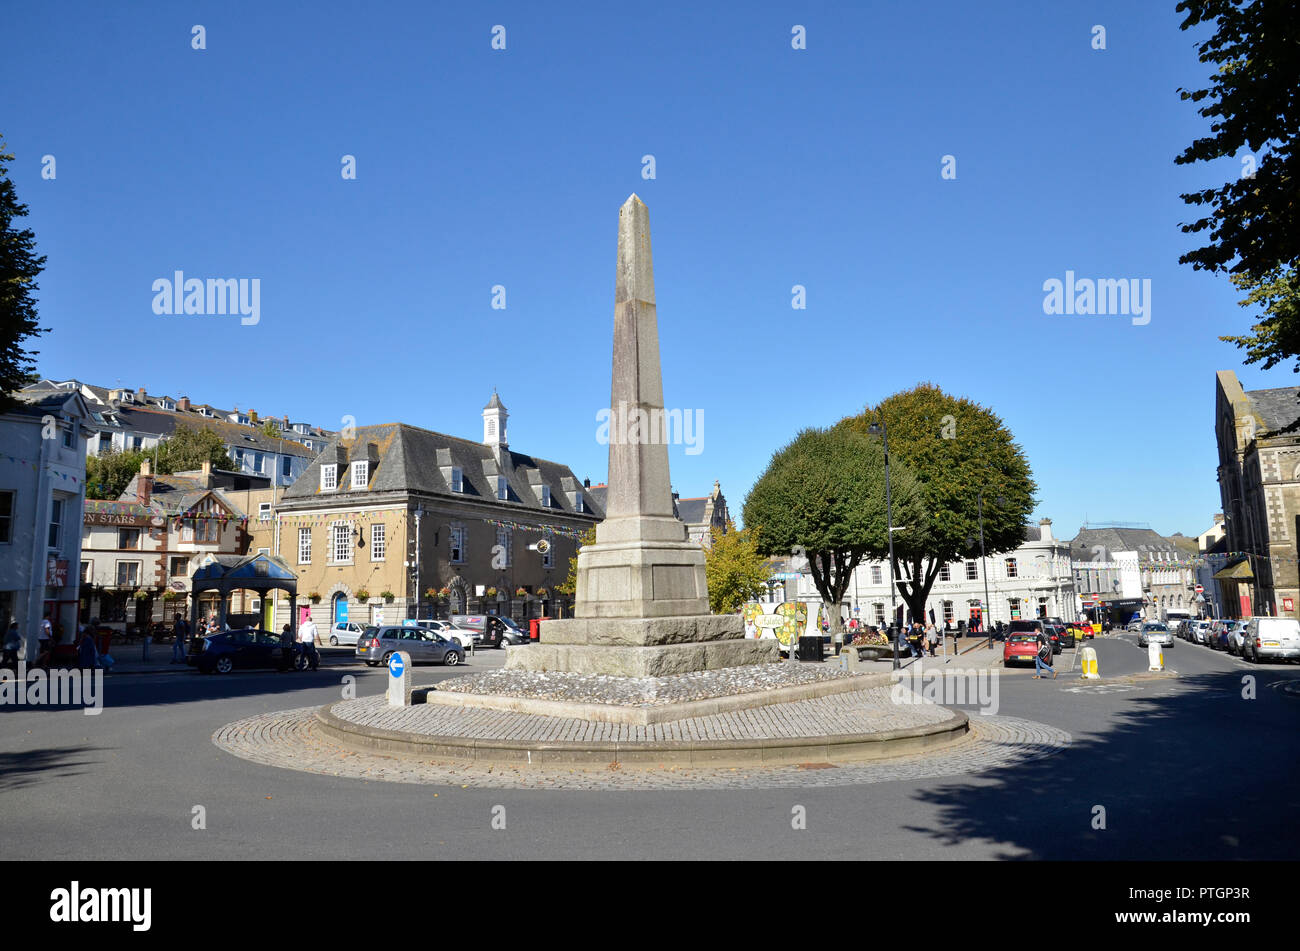 The Moor town square area of Falmouth in Cornwall Stock Photo